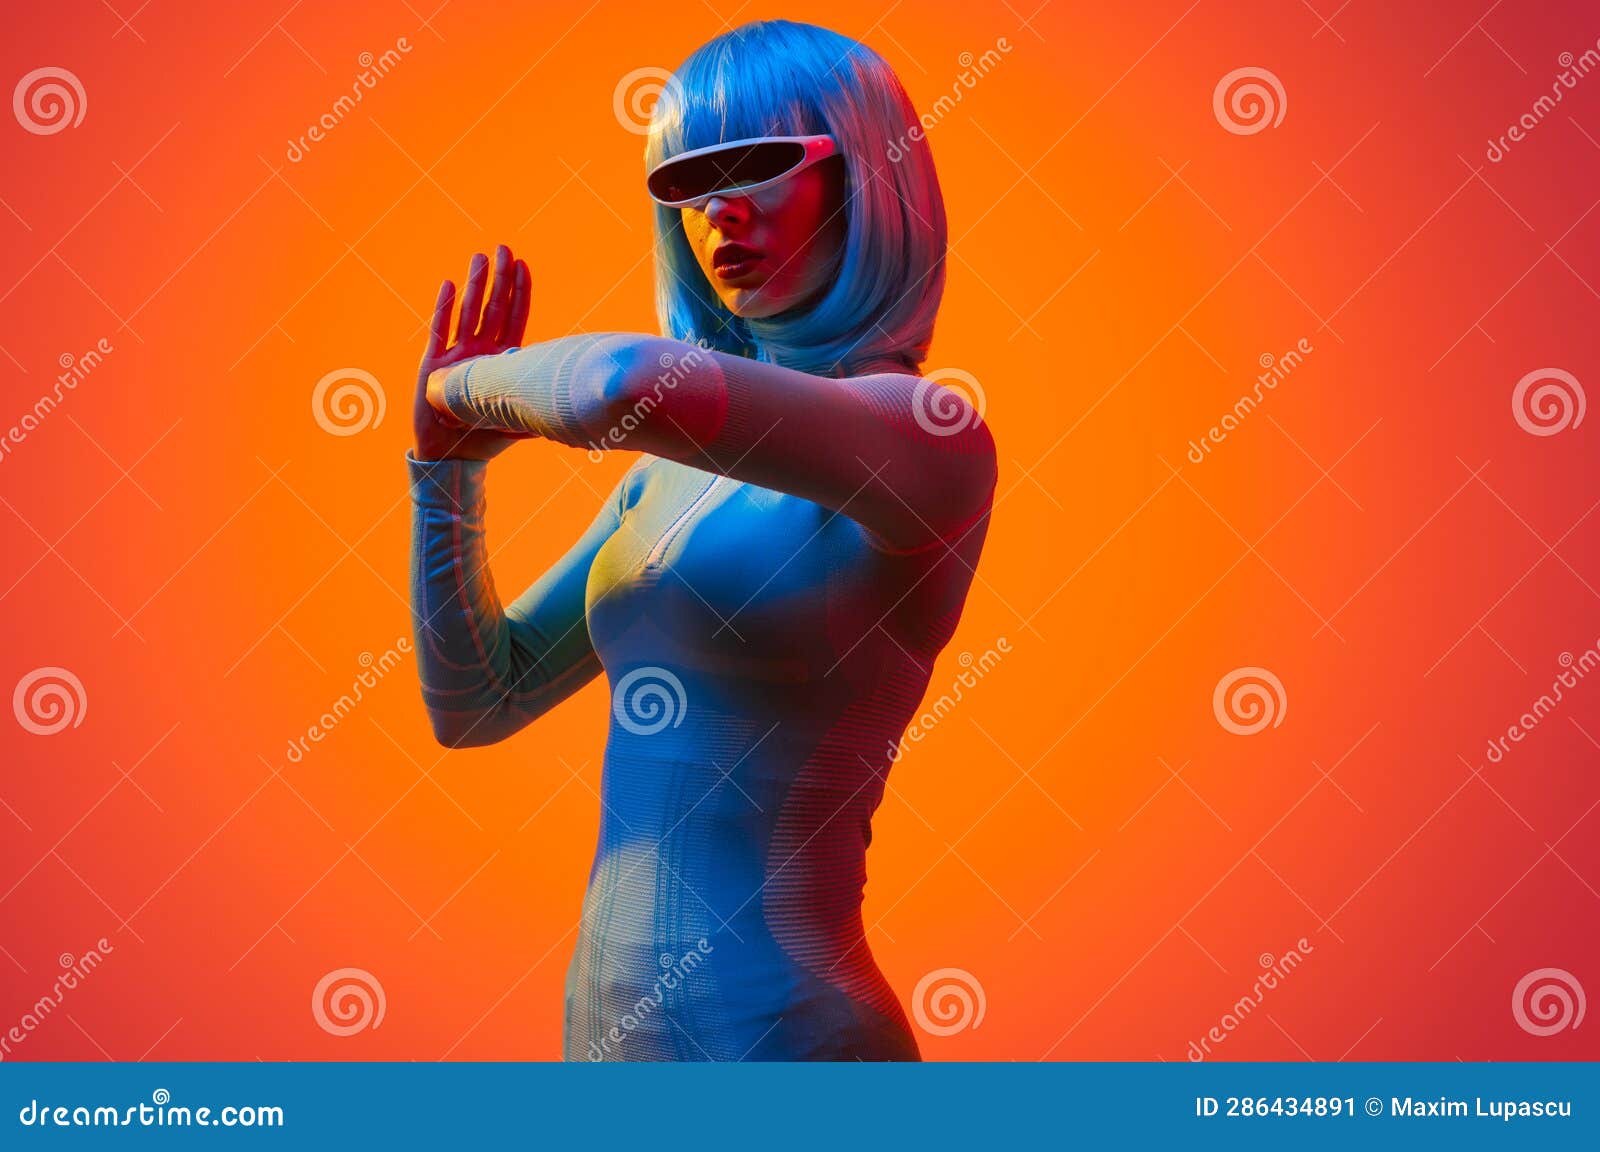 9. Blue-haired alien costume - wide 7